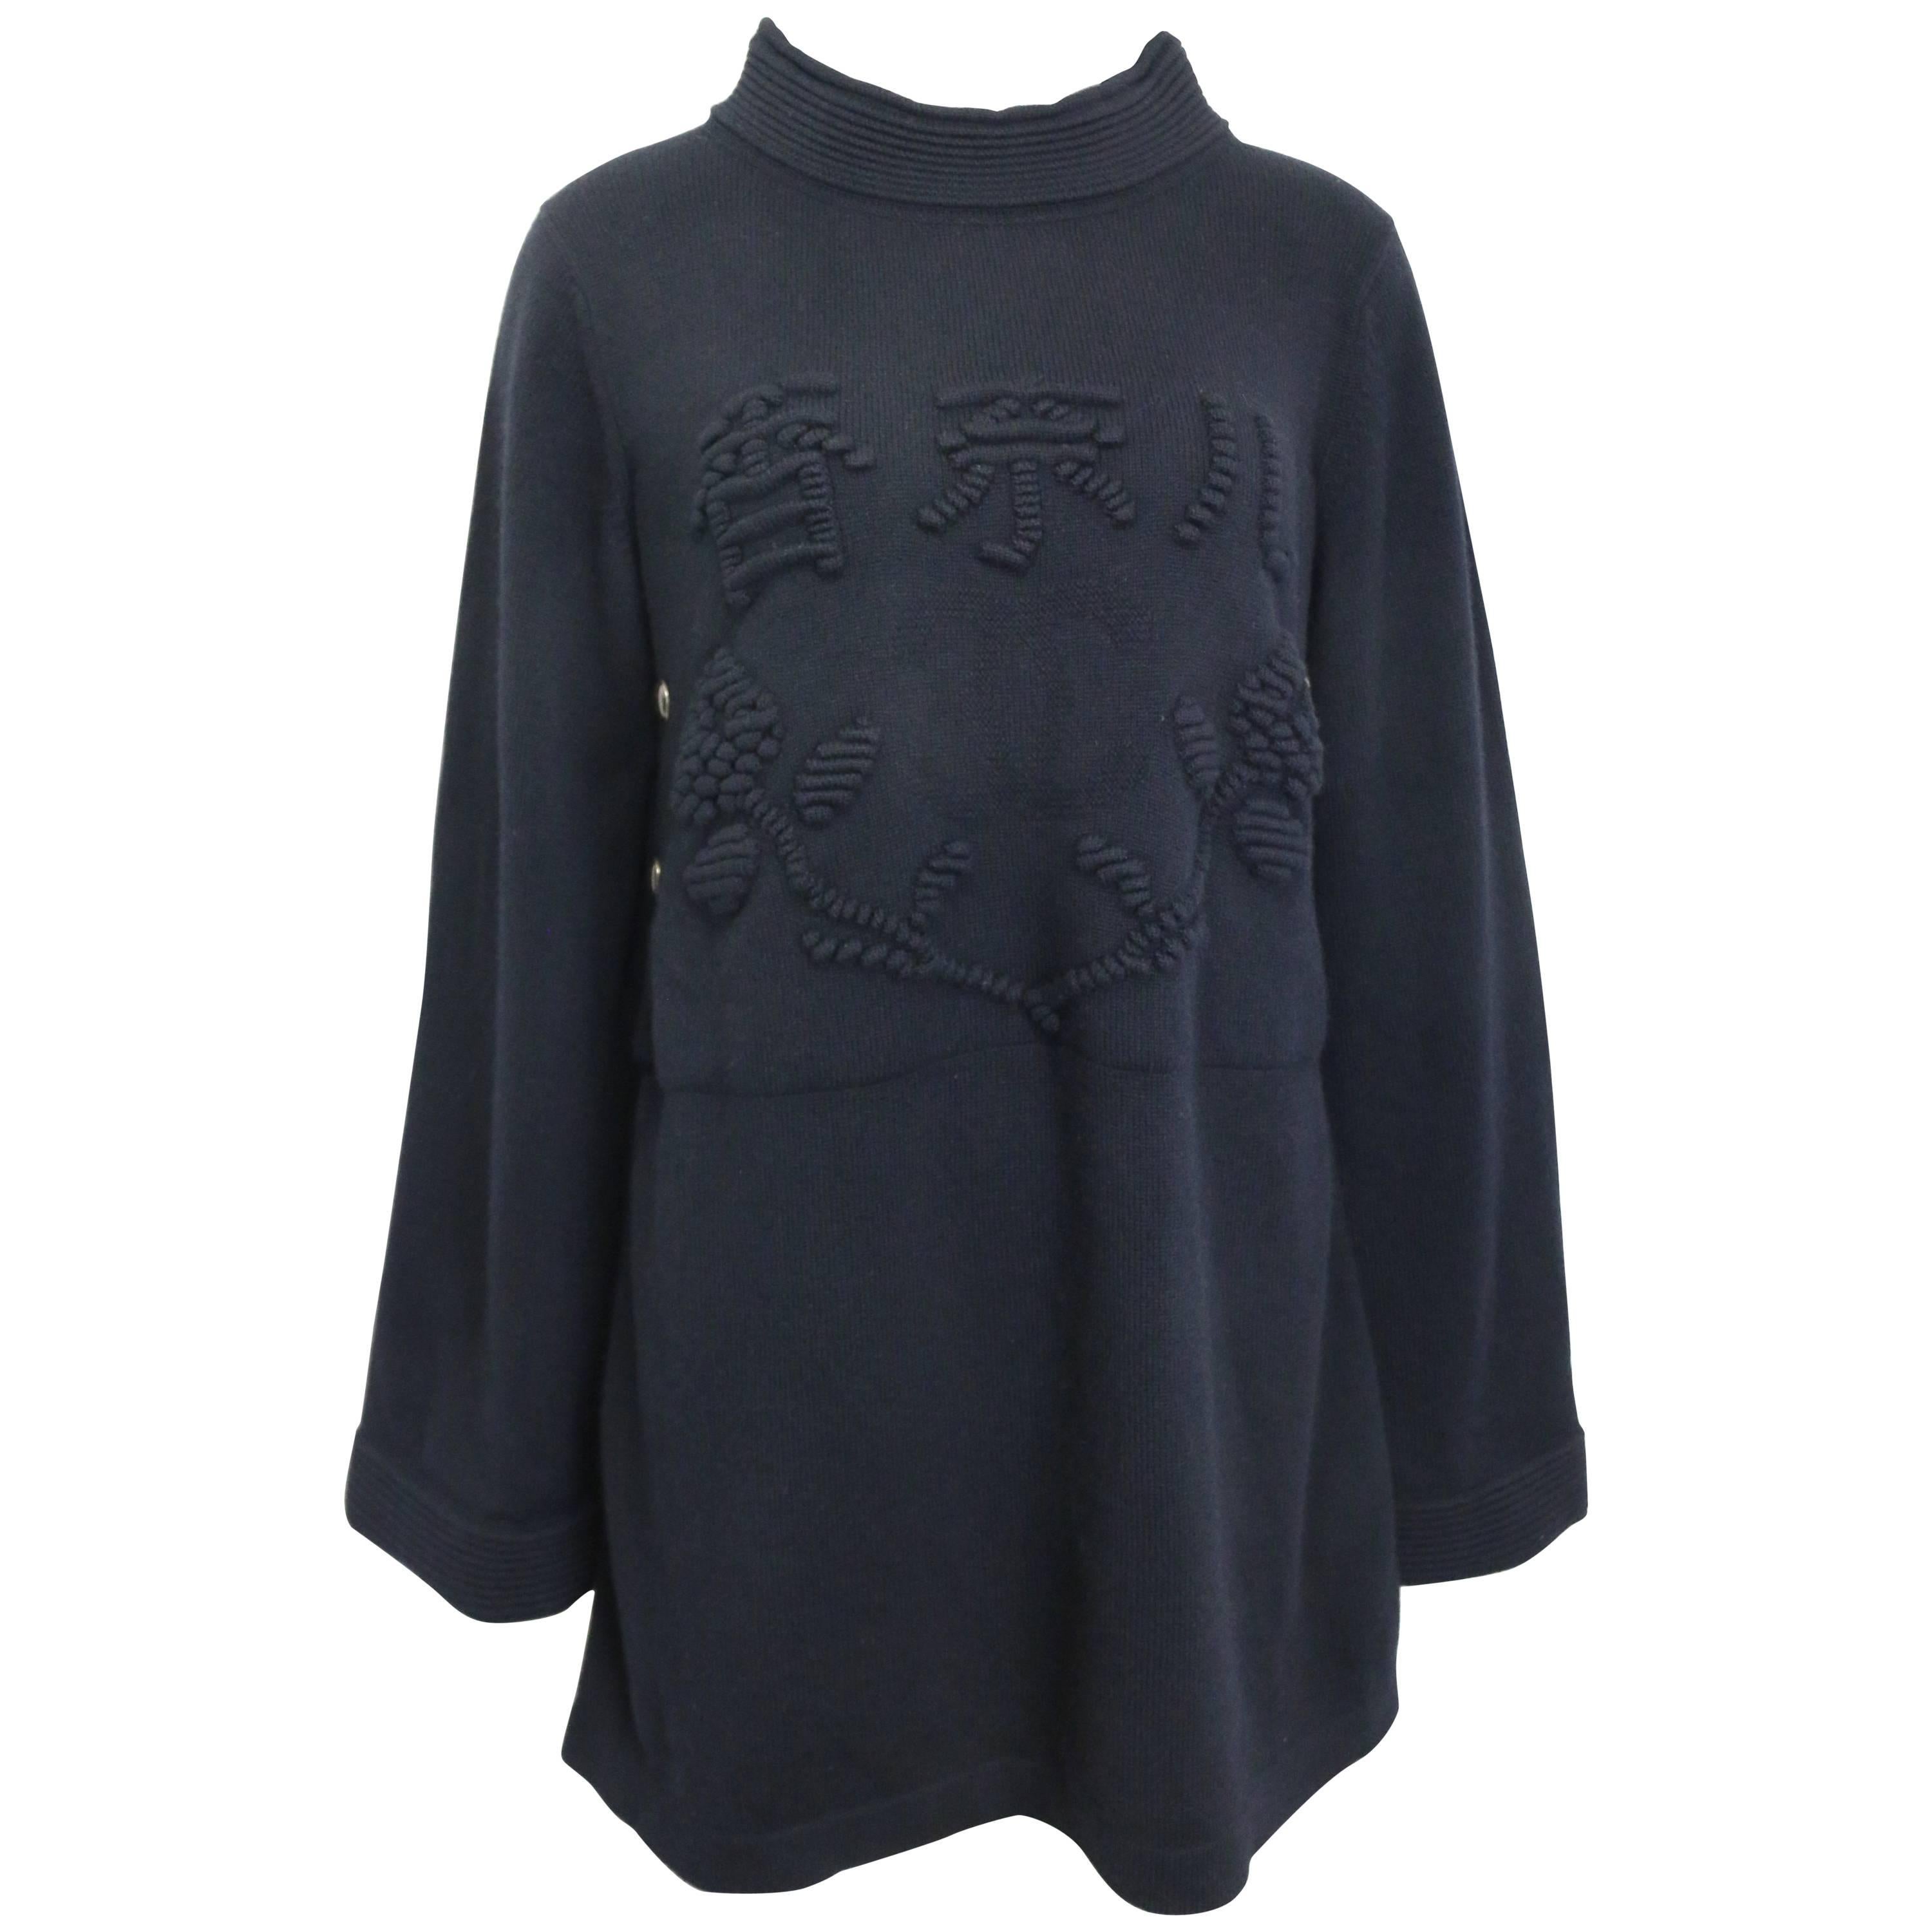 Limited 2010 Shanghai Chanel Black Cashmere "CC"  Sweater Dress For Sale